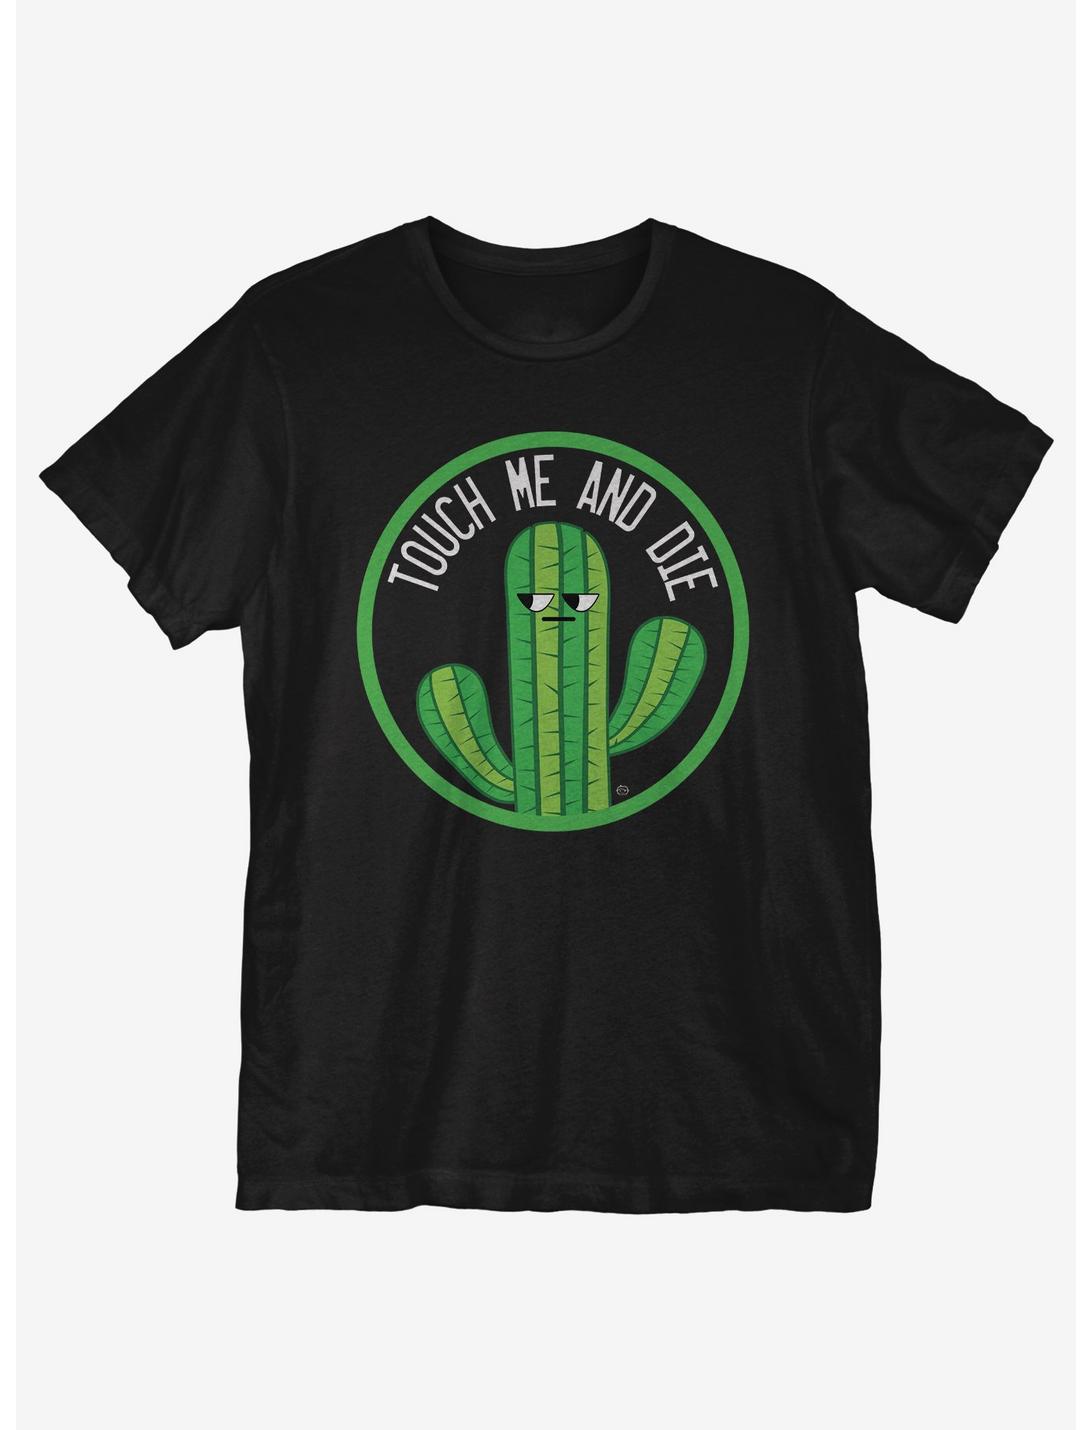 Touch Me And Die T-Shirt, BLACK, hi-res